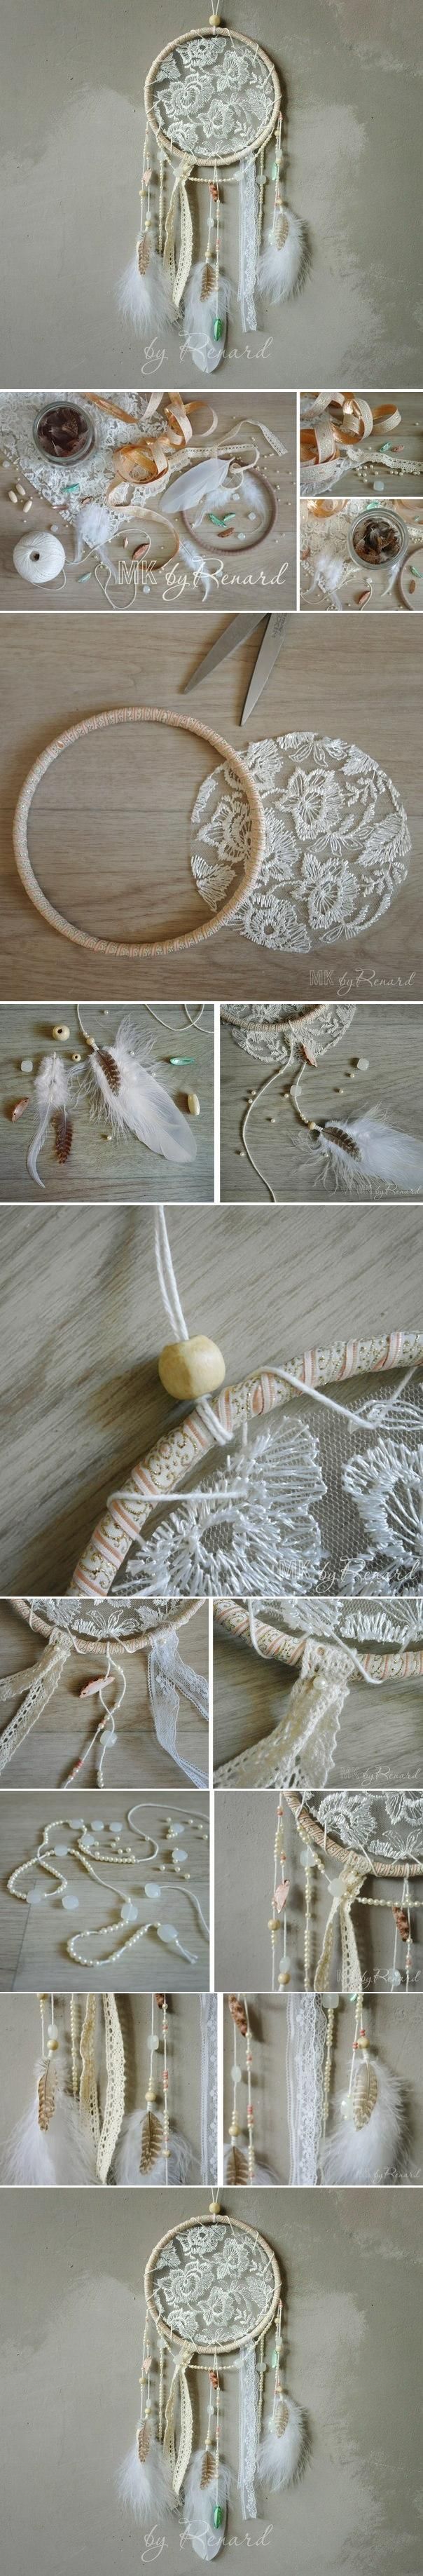 10 Stunning Crafts Using Lace - DIY Thought